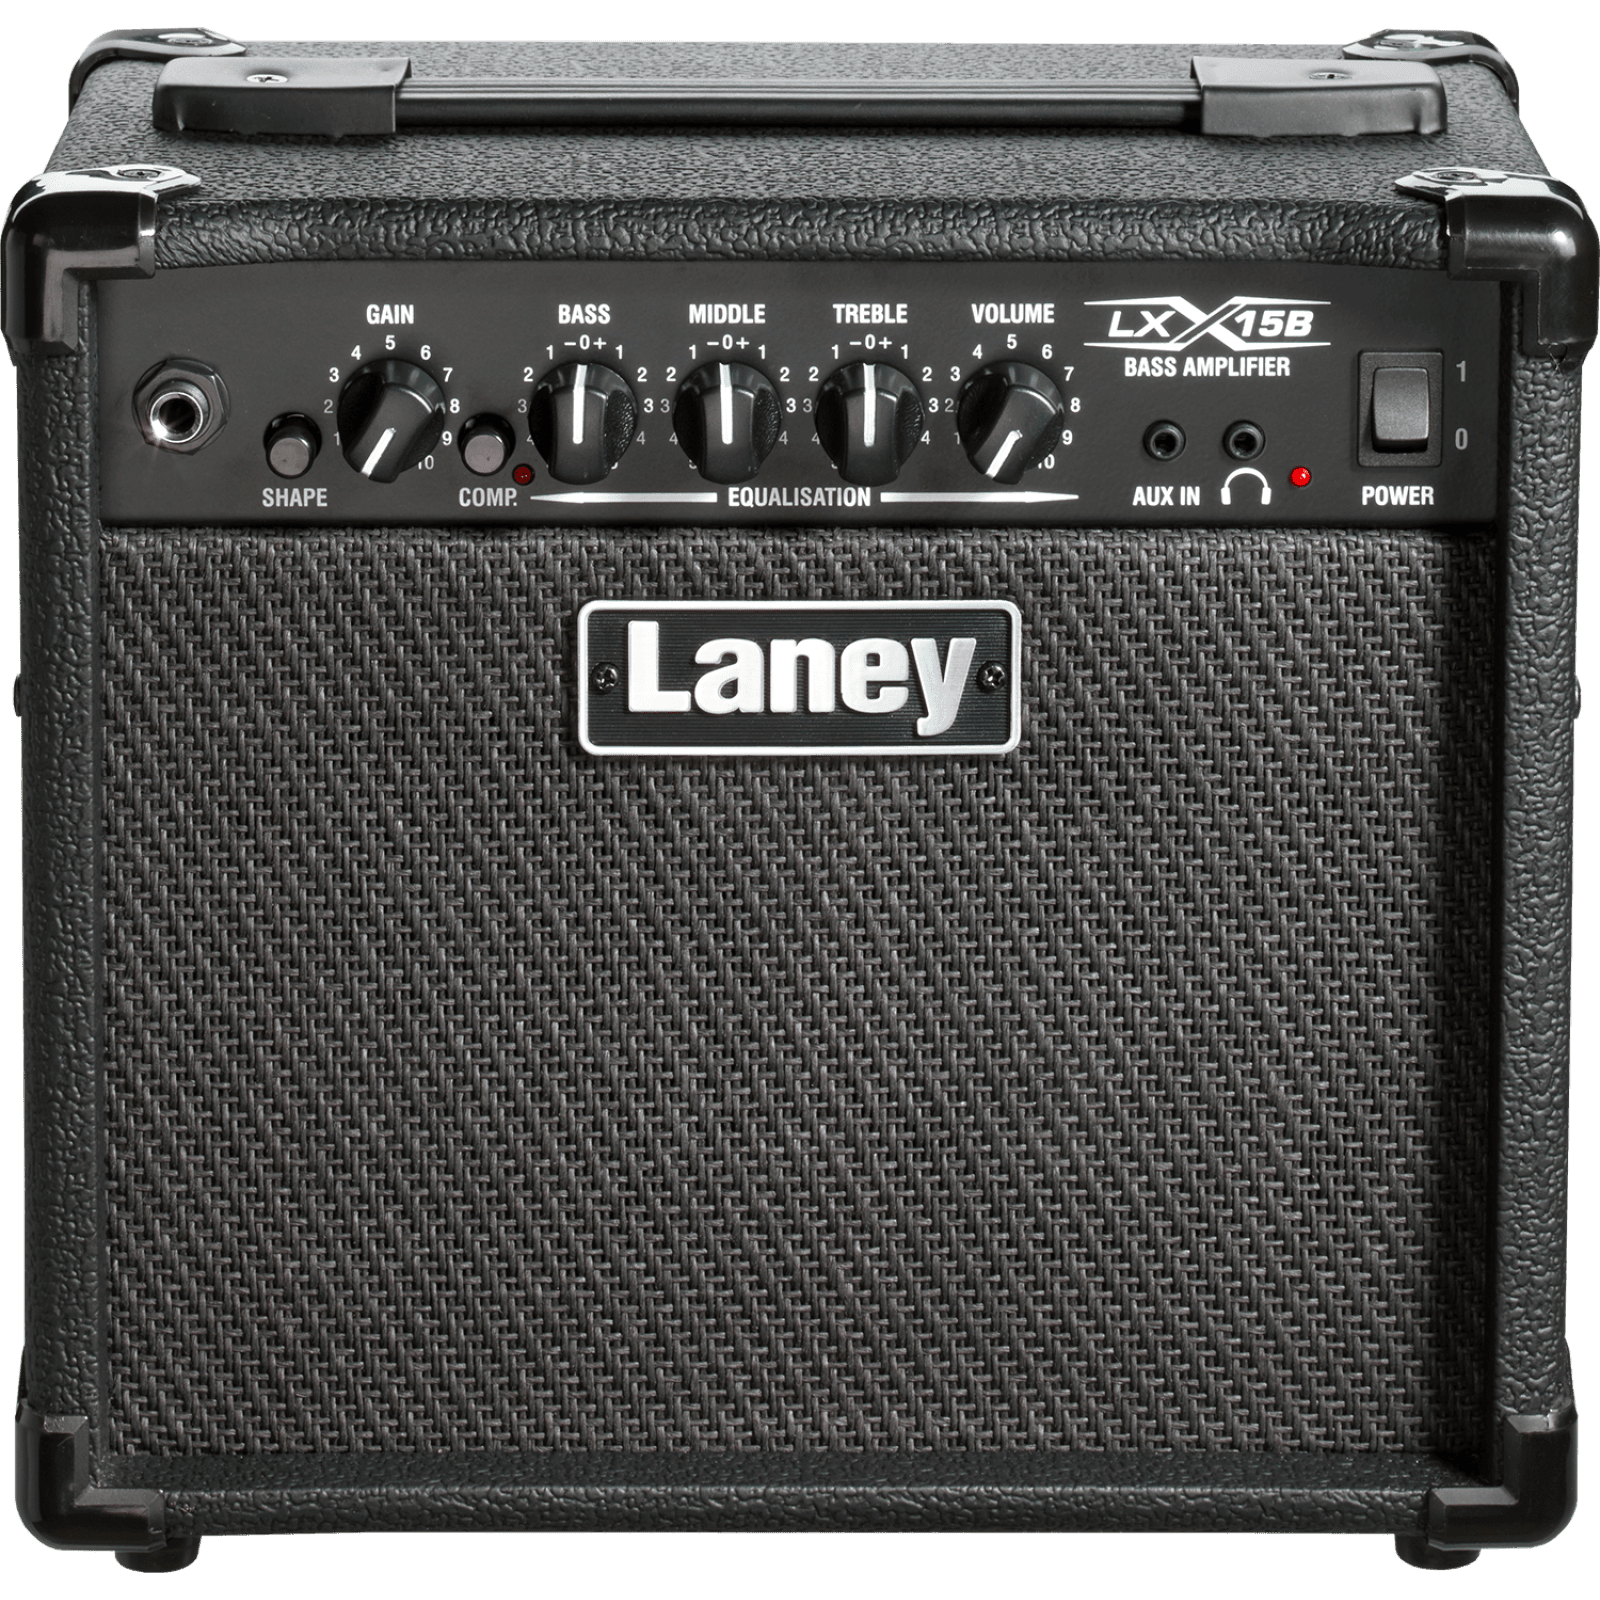 LX 15W 2X5 Bass Amp - Guitars - Amplifiers by AMS at Muso's Stuff